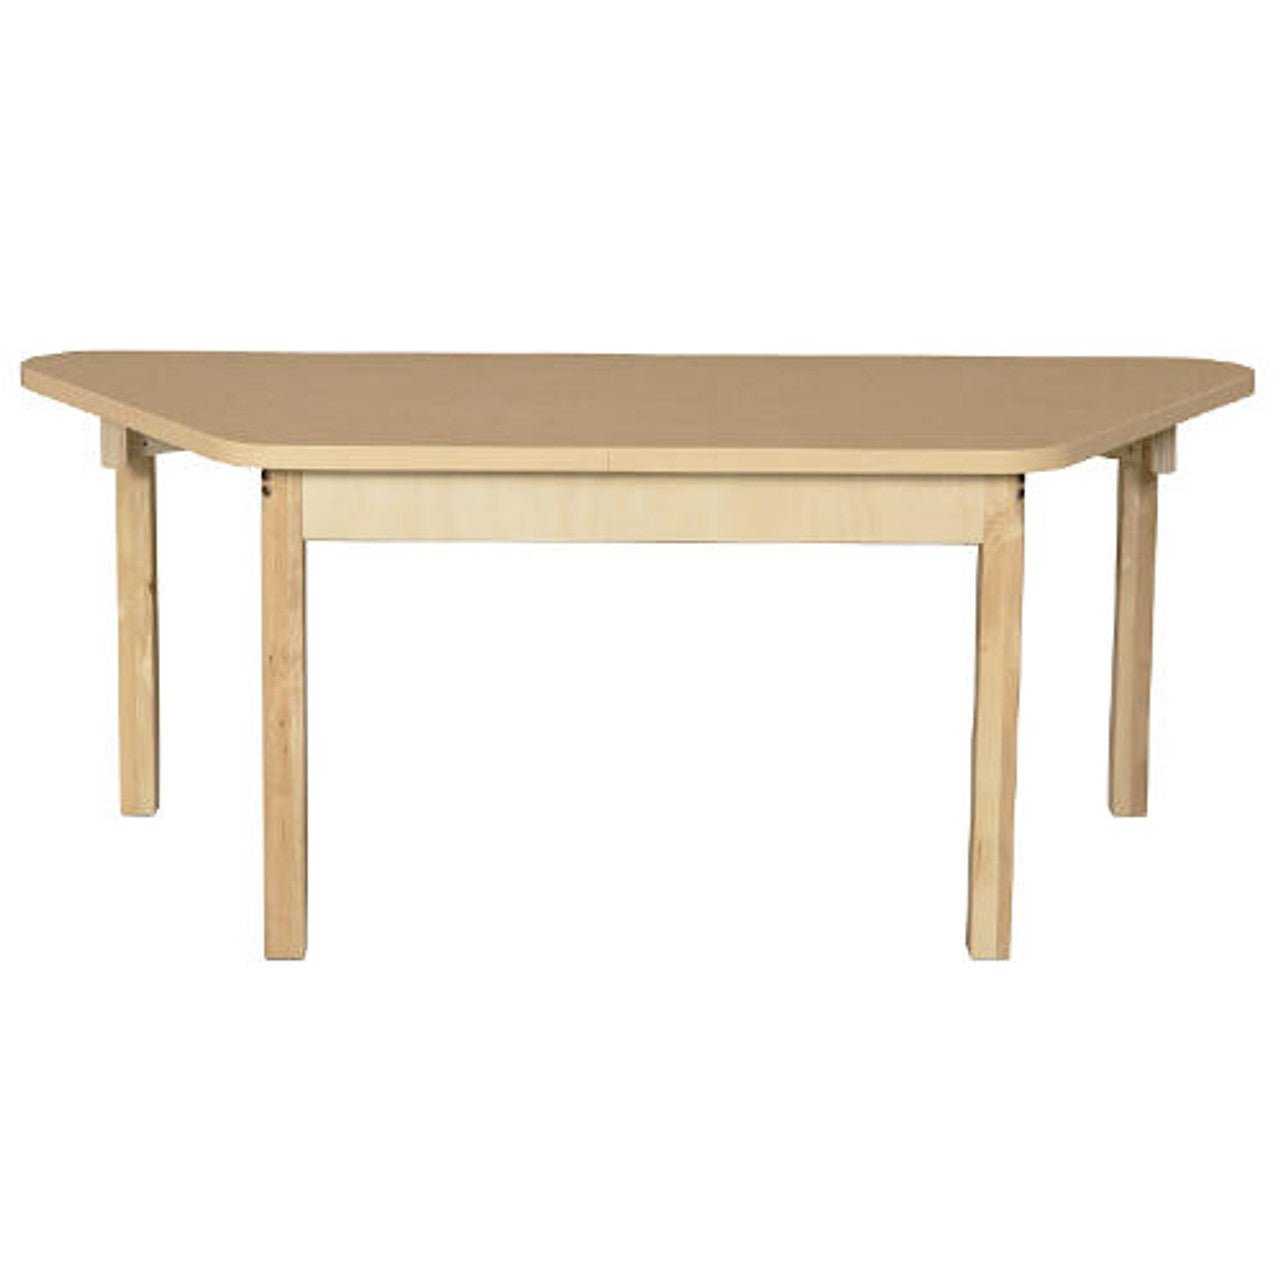 Trapezoidal High Pressure Laminate Table with Hardwood Legs- 18"